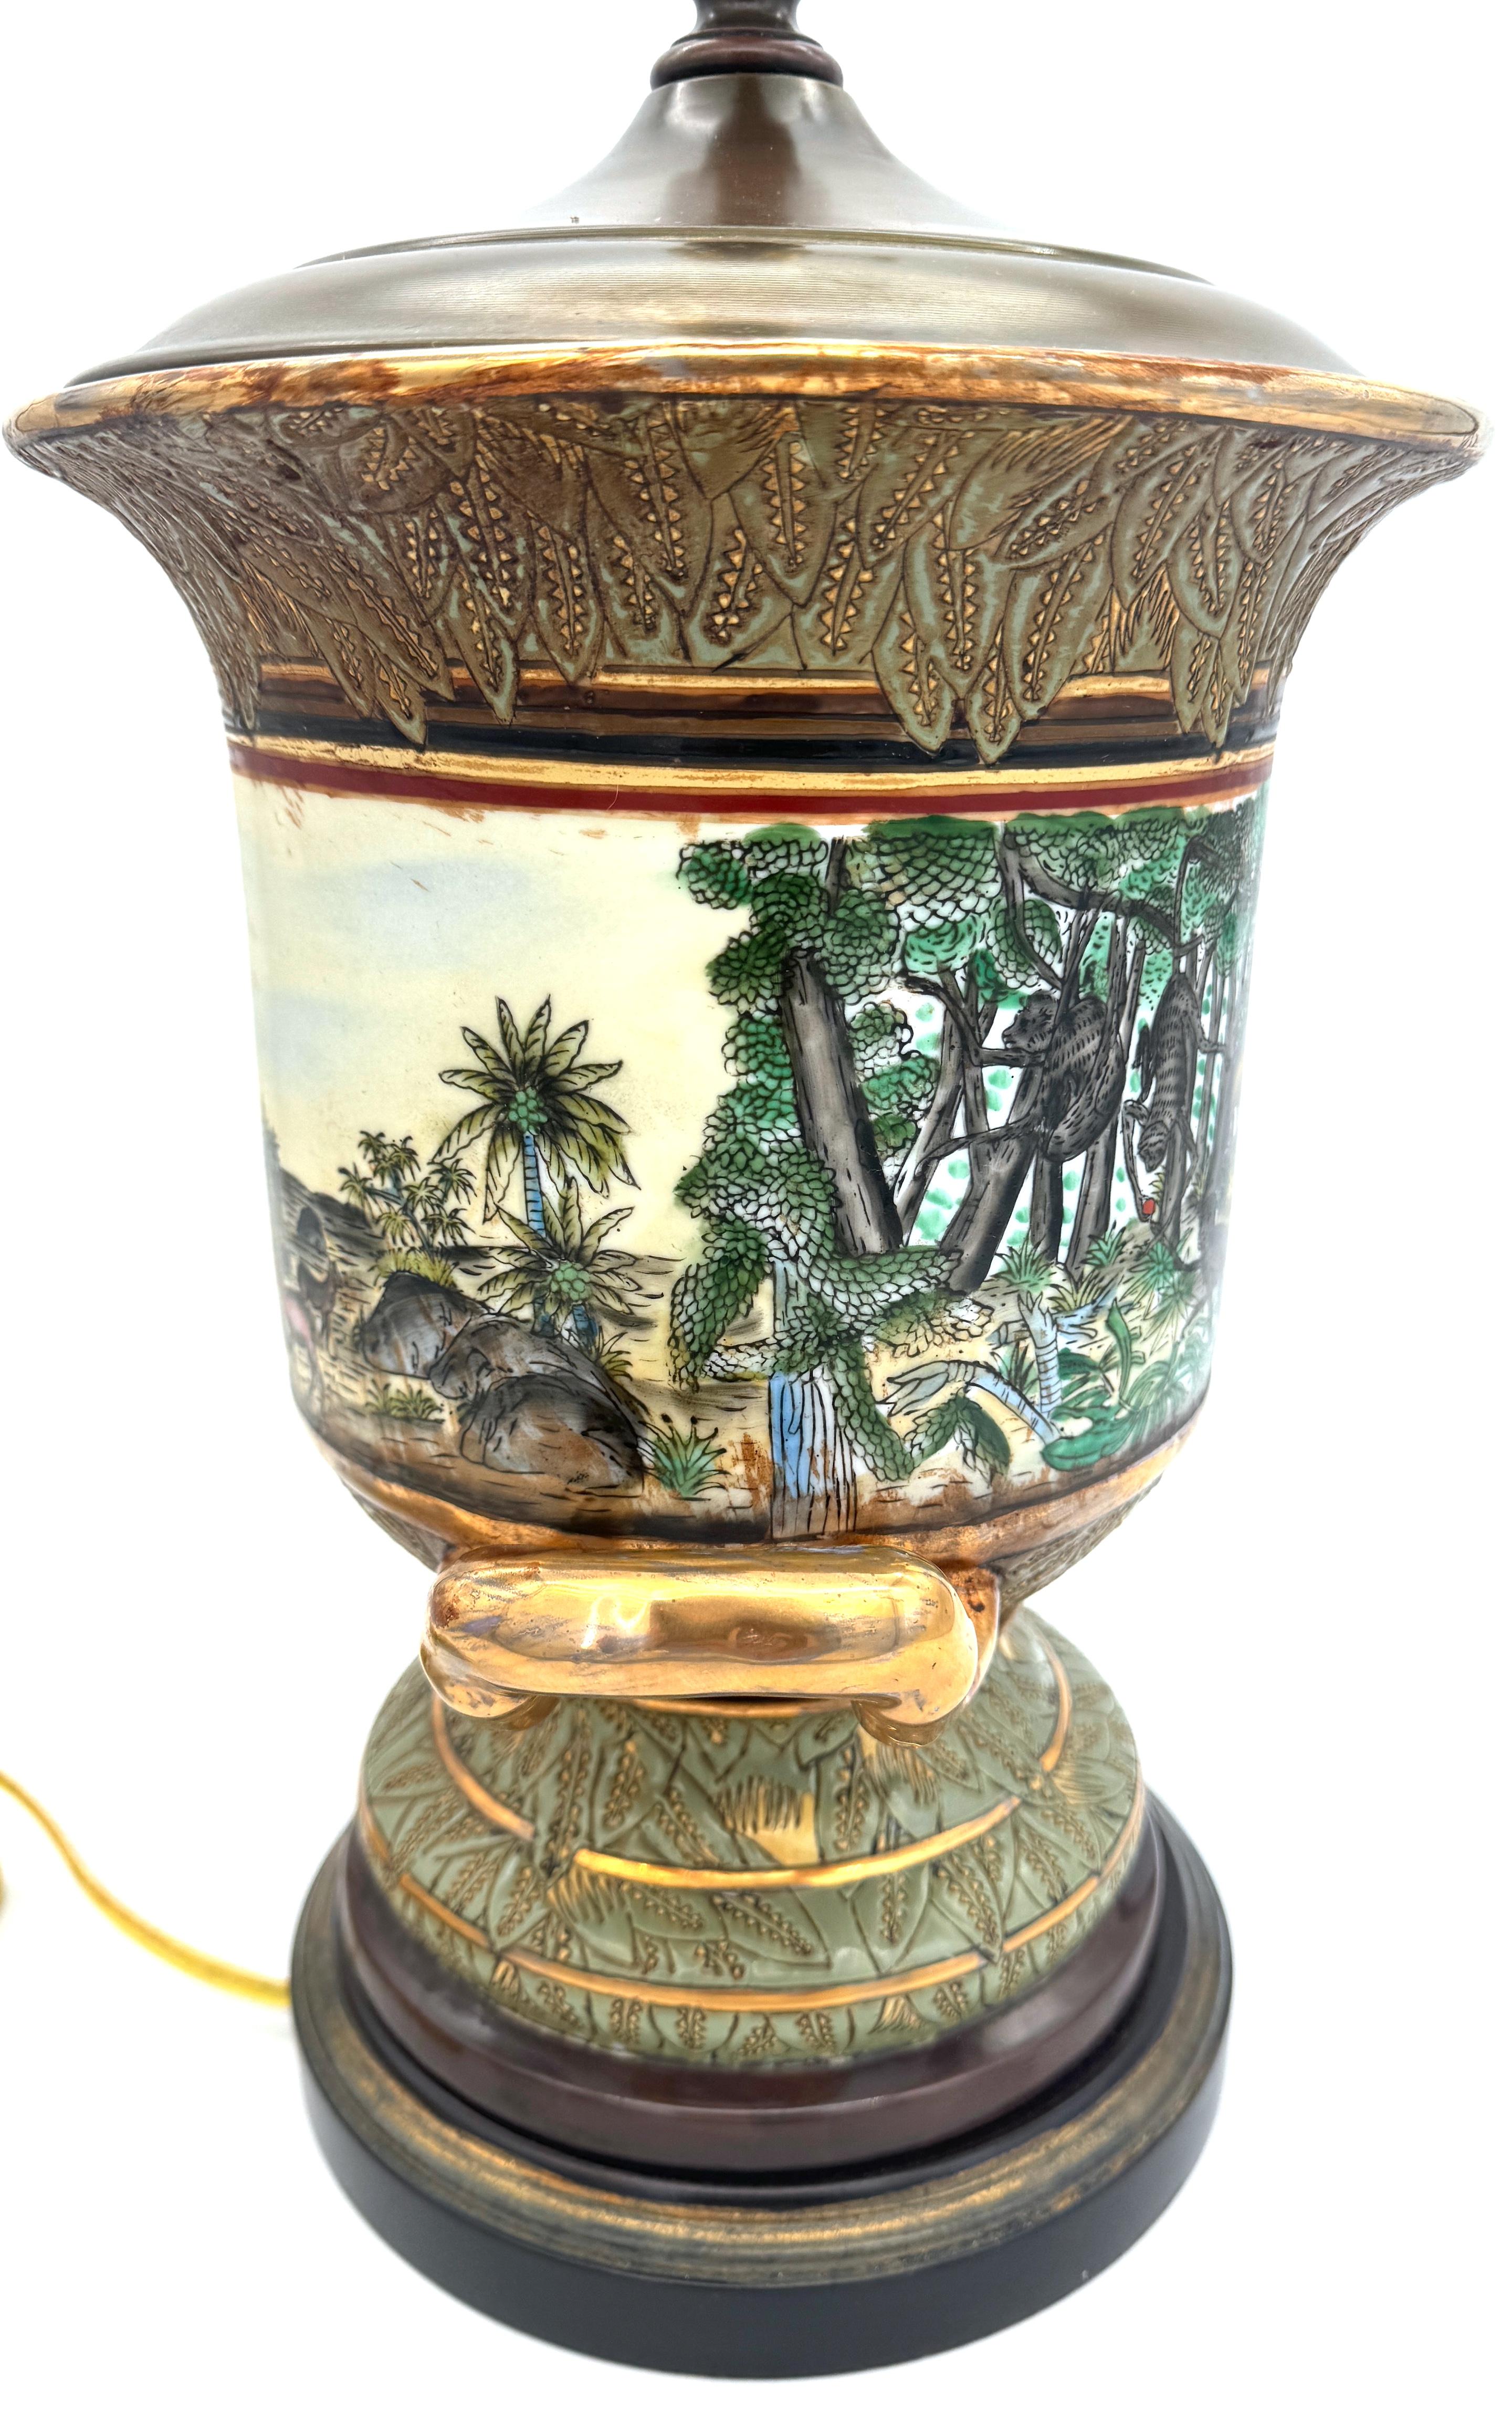 20th Century Neoclassical Old Paris Style Exotic Jungle Landscape Campana Urn Lamp For Sale